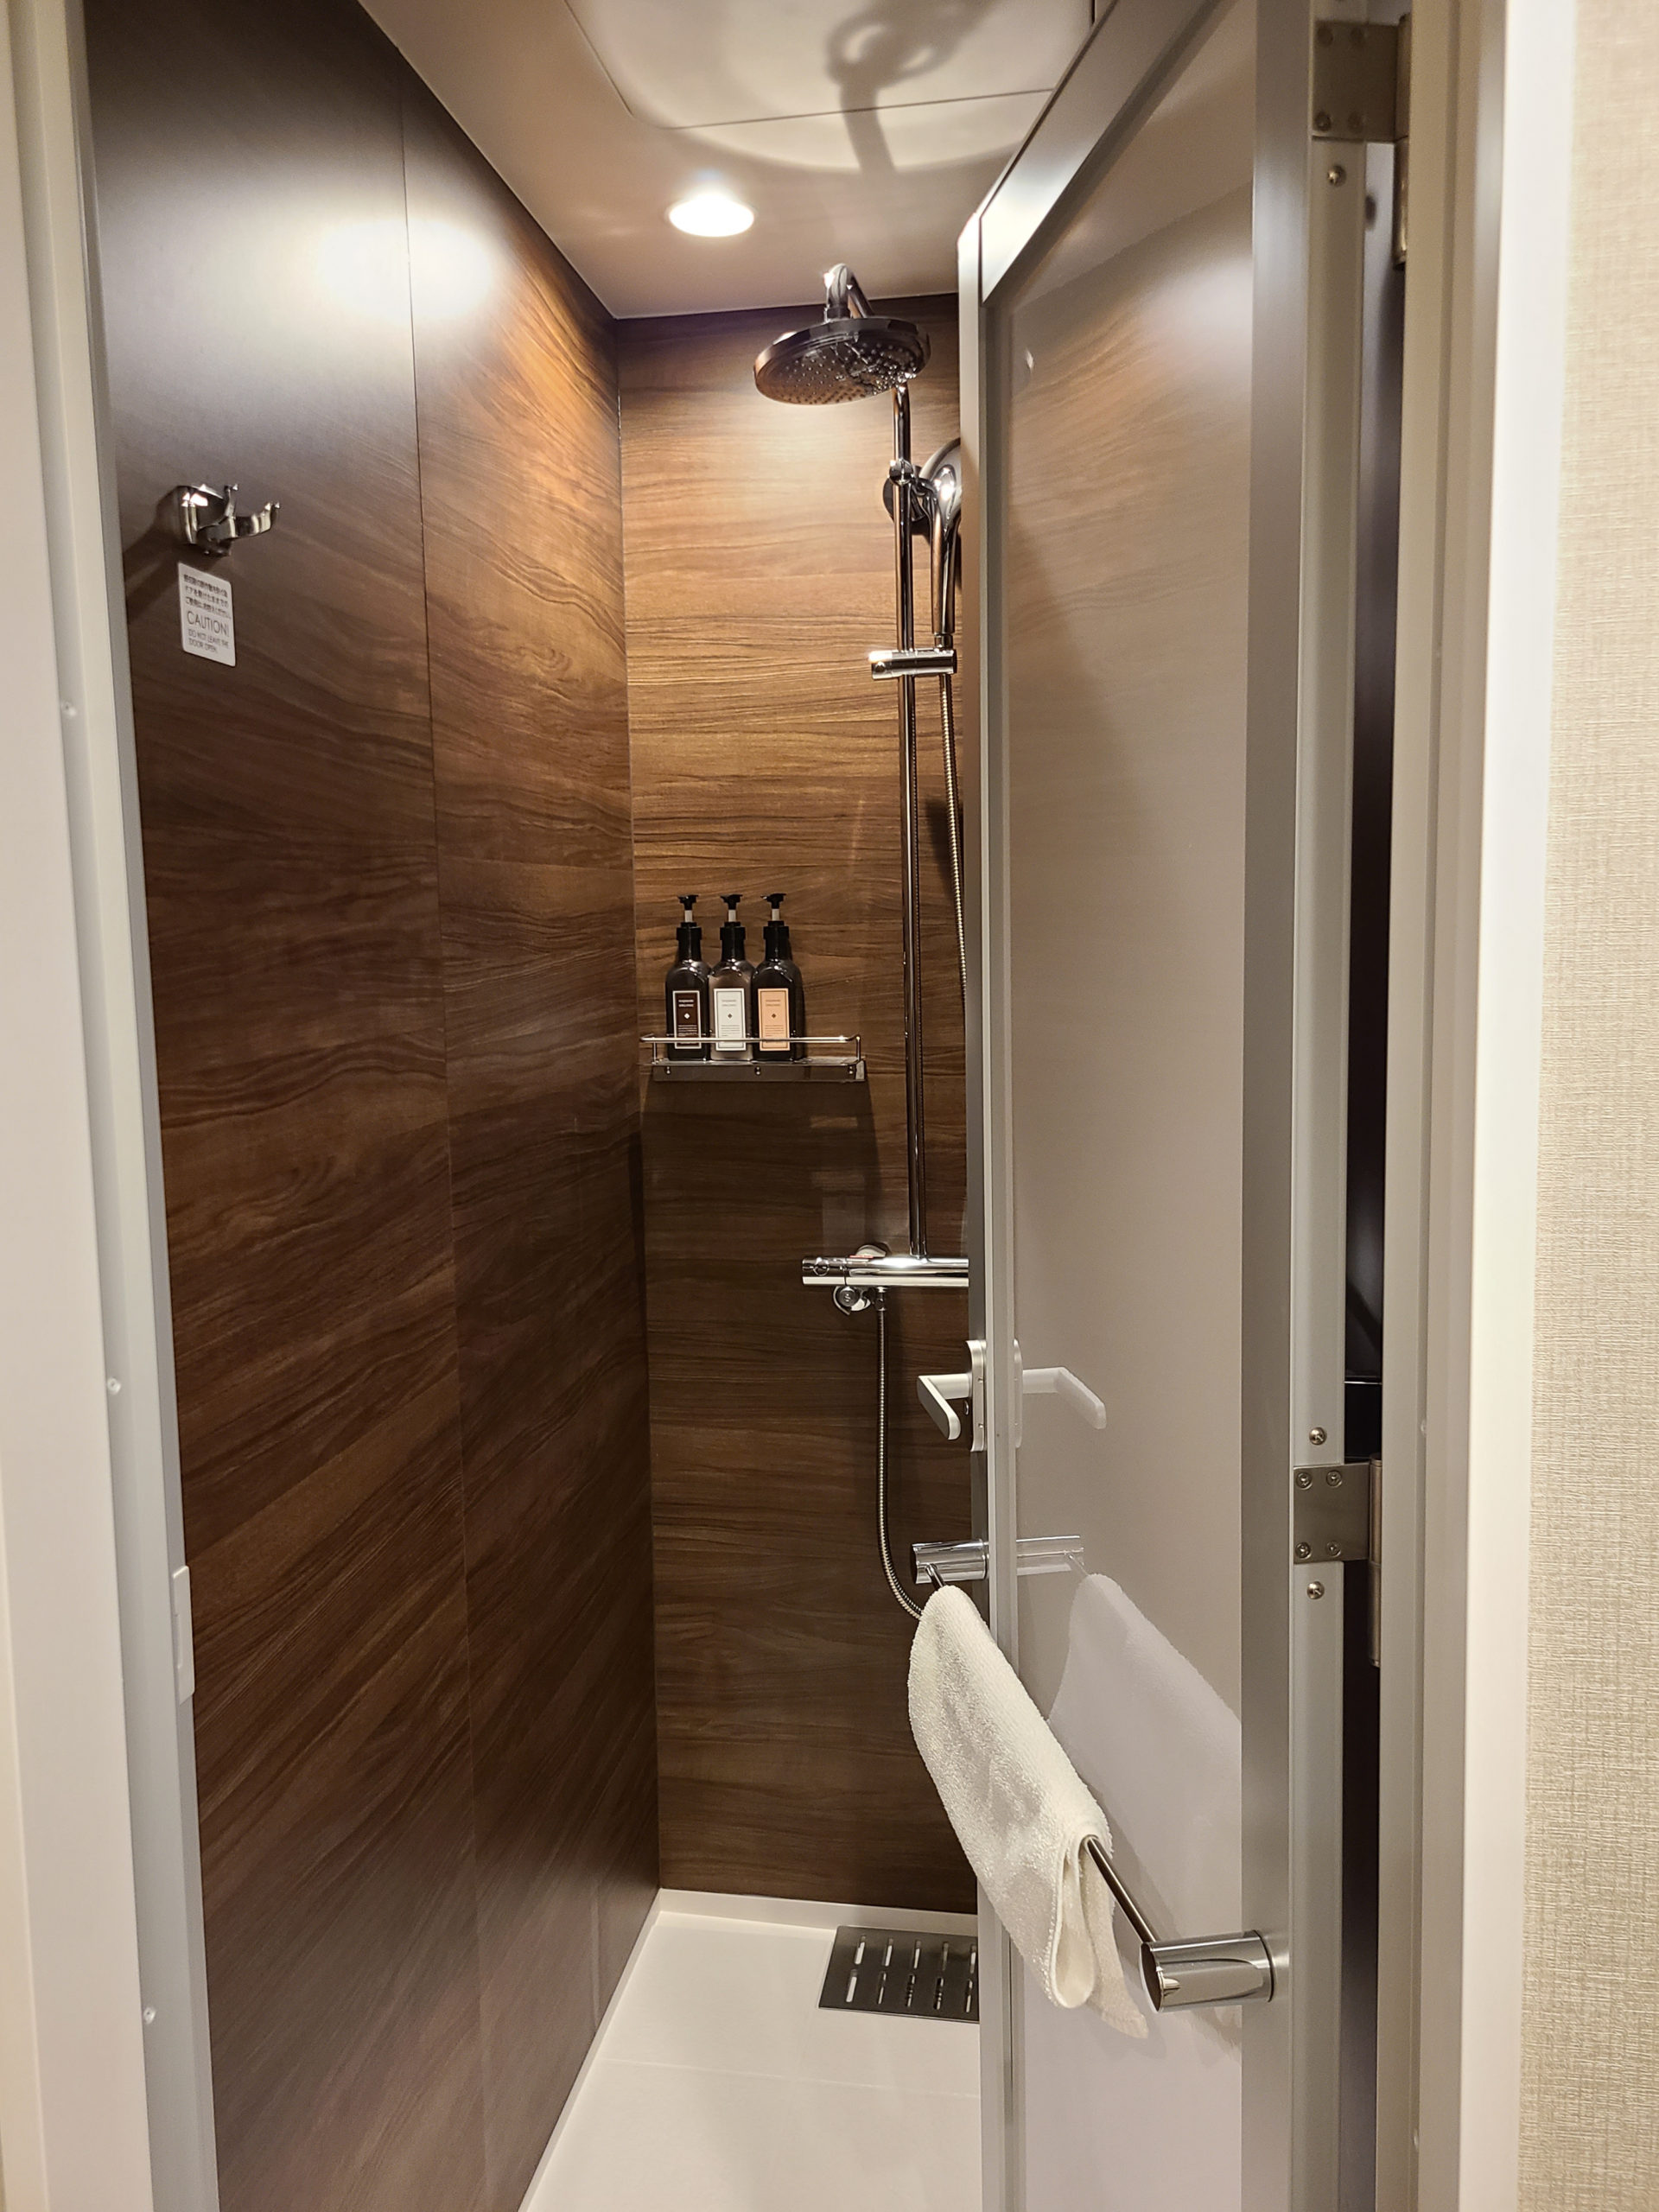 This room has a separate shower, toilet, and sink